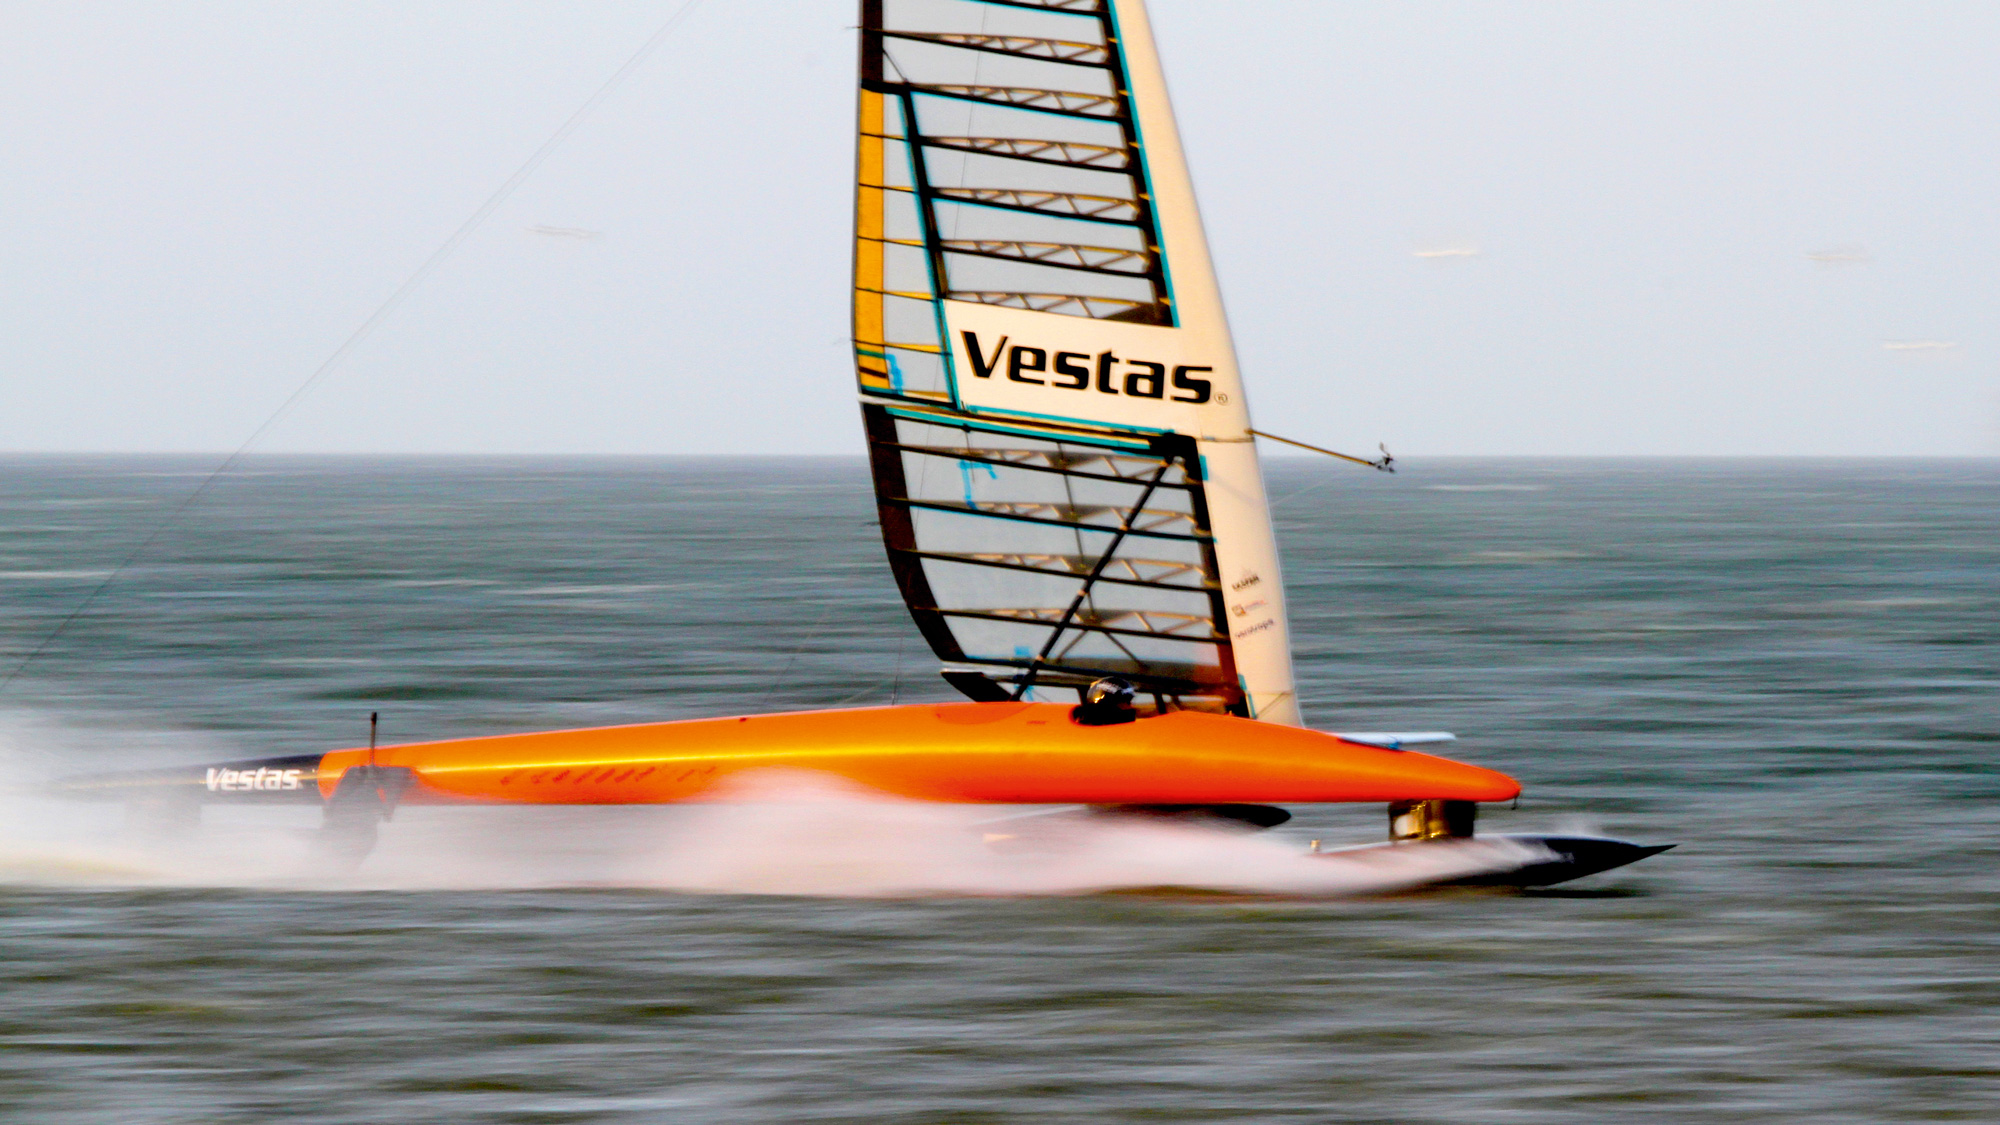 Speed, Skill, and Adrenaline: Inside the World’s Fastest Sailing Competitions